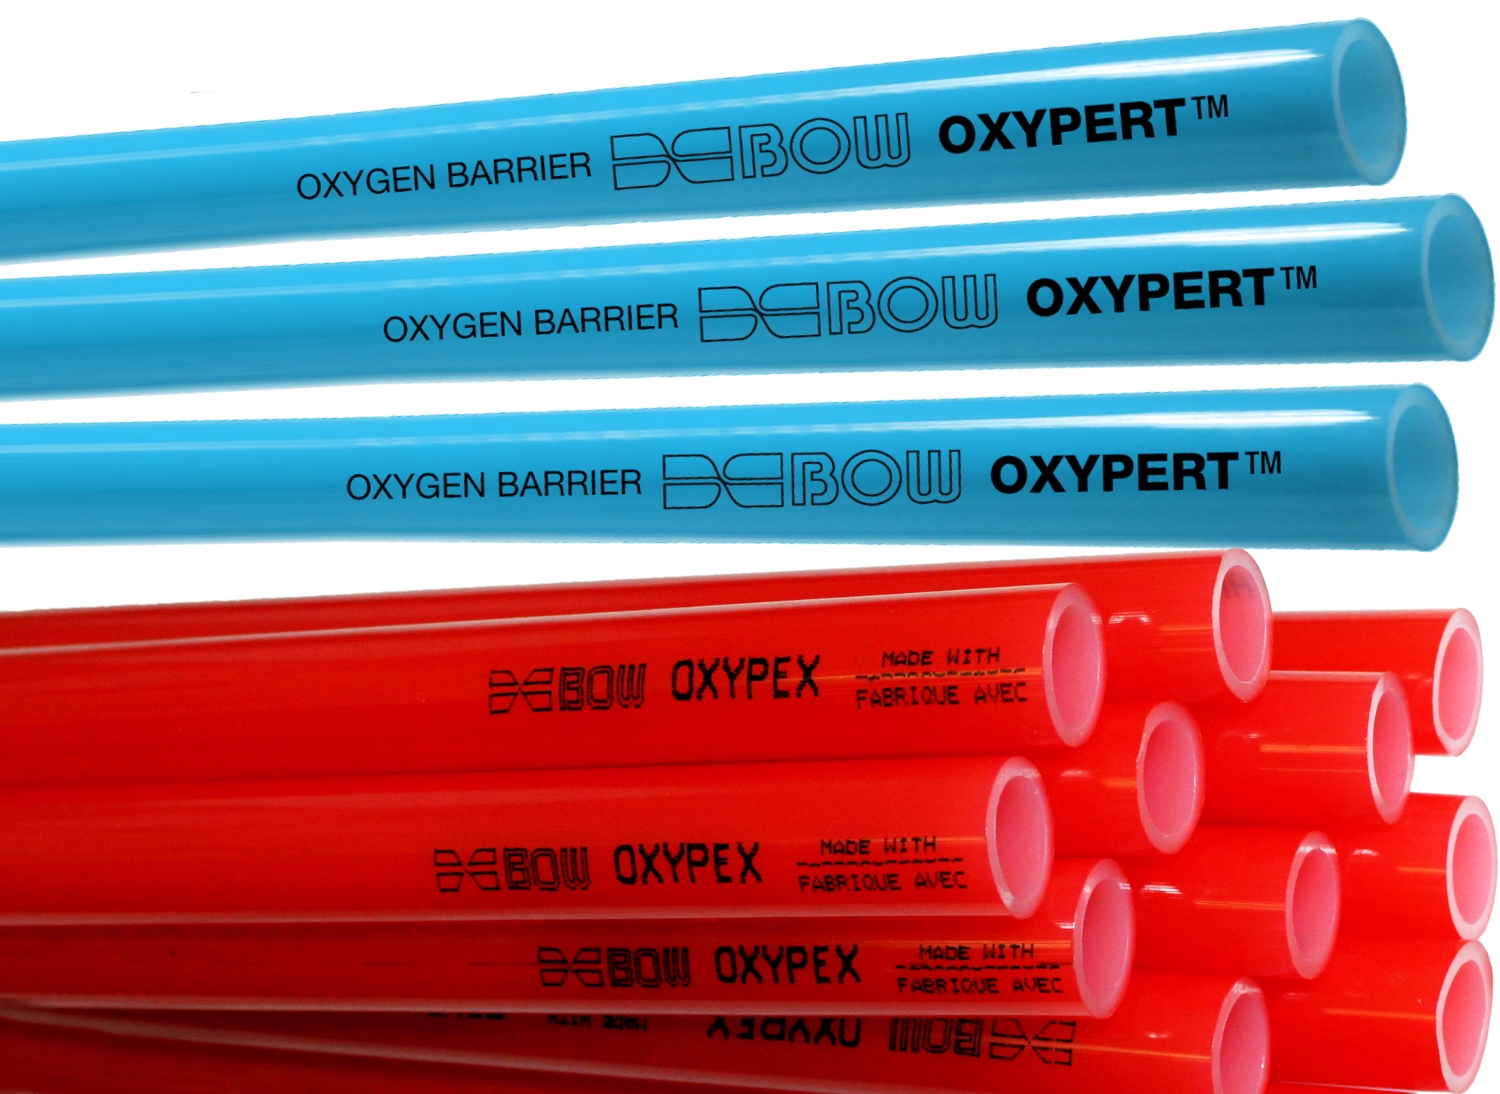 BOW OXYPERT™ and OXYPEX